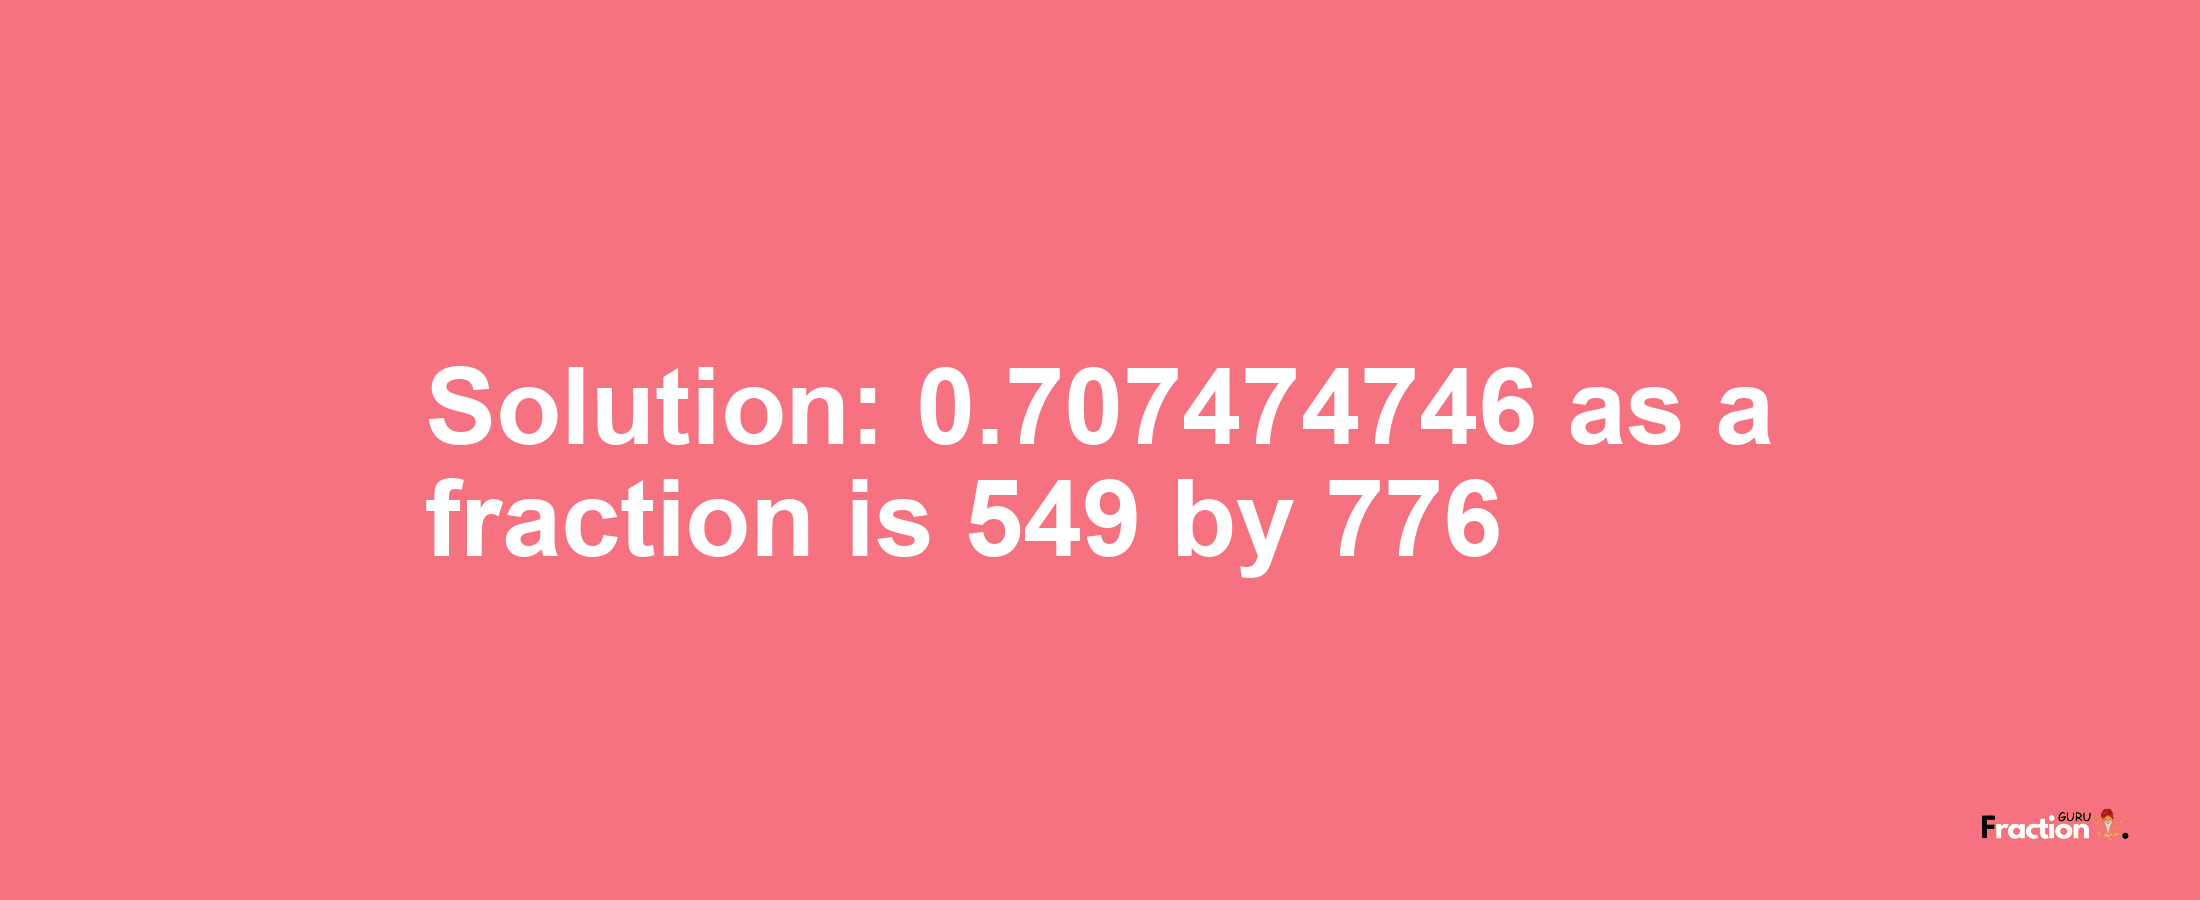 Solution:0.707474746 as a fraction is 549/776